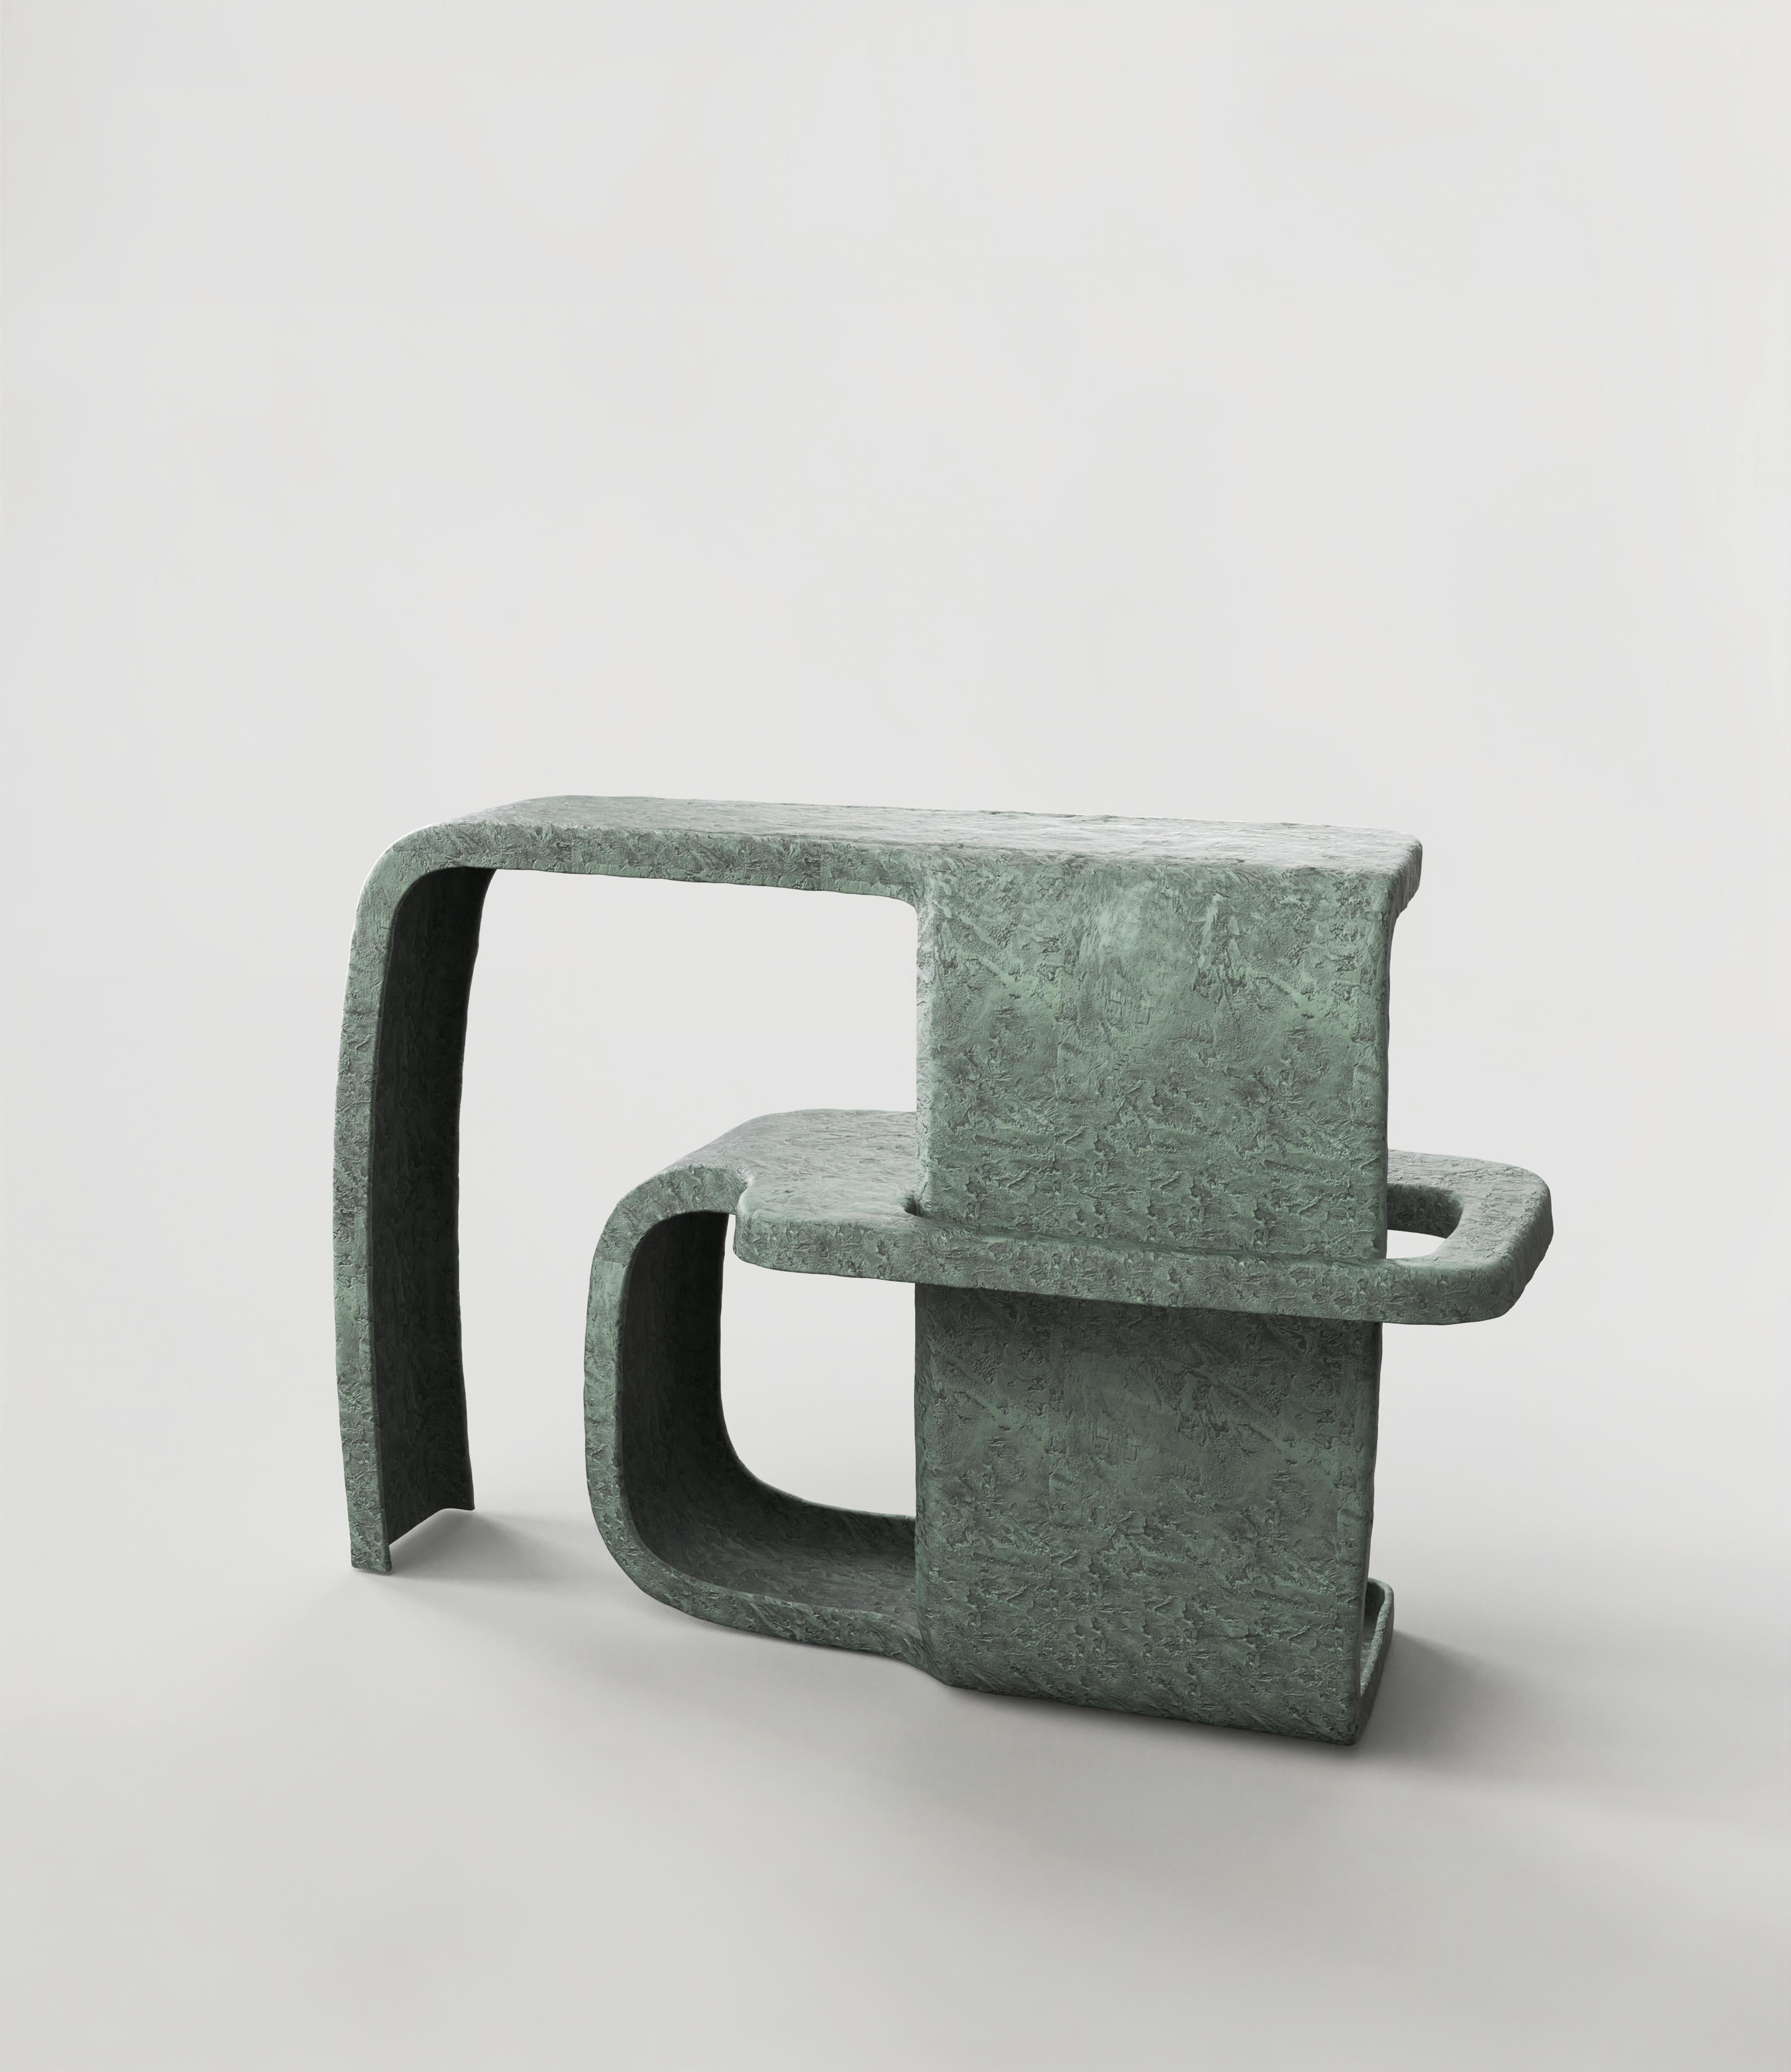 Vertigo N03 console by Edizione Limitata
Limited Edition. Signed and numbered.
Designers: Simone Fanciullacci
Dimensions: H 77 × W 45 × L 117 cm
Materials: Green patina bronze

Edizione Limitata, that is to say “Limited Edition”, is a brand